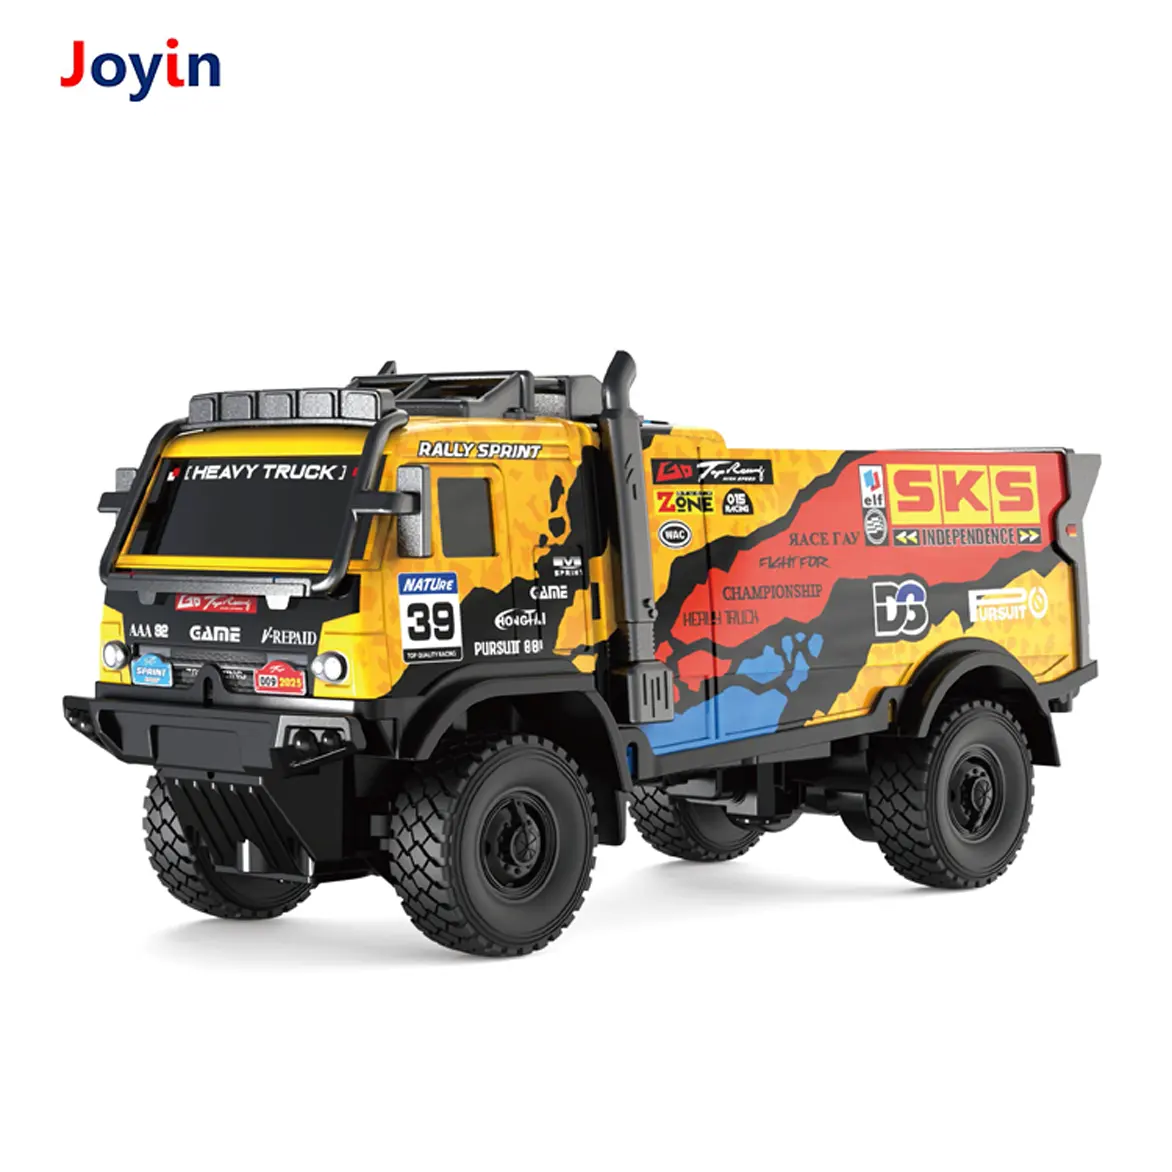 27 Mhz Off Road Hobby RC Toy Vehicle Remote-Controlled Rally Truck with Colorful Bodylight Light Show